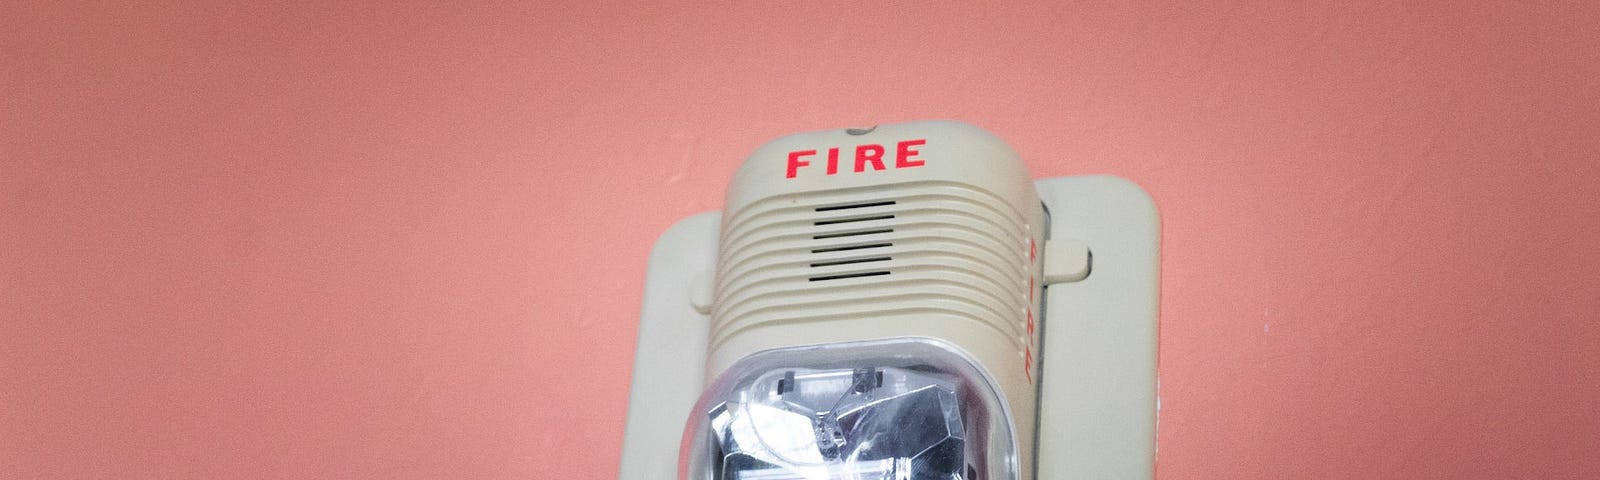 A fire alarm alert with a speaker and a flashing light mounted to a coral-colored wall